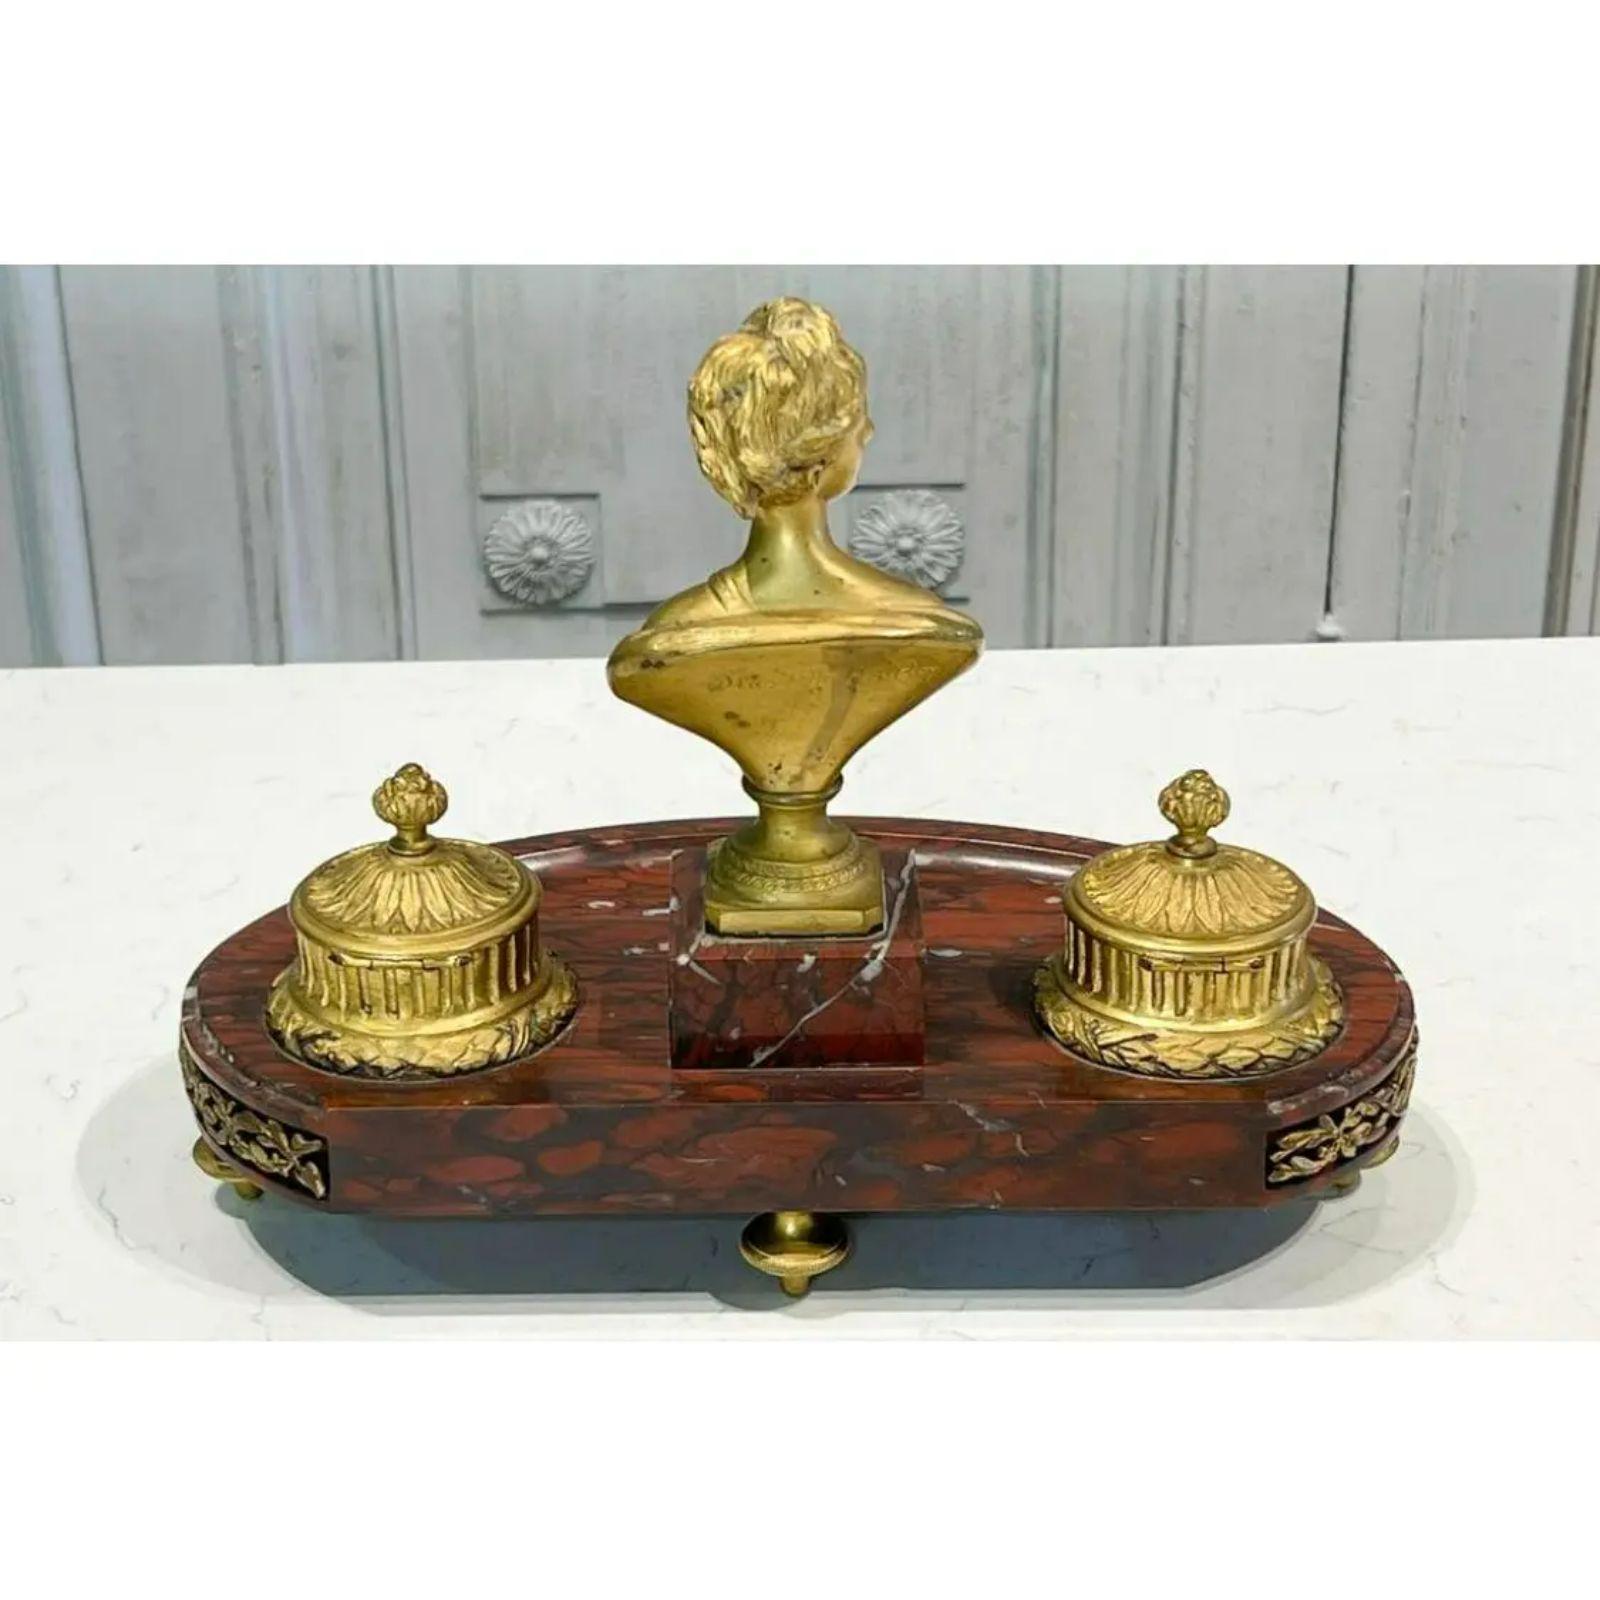 Antique French gilt bronze inkwell on rouge marble stand. It is of superb quality and features a central figure of Diana The Huntress.

Provenance: From the estate of Texas Oil Tycoon T. Boone Pickens.

Additional information: 
Materials: